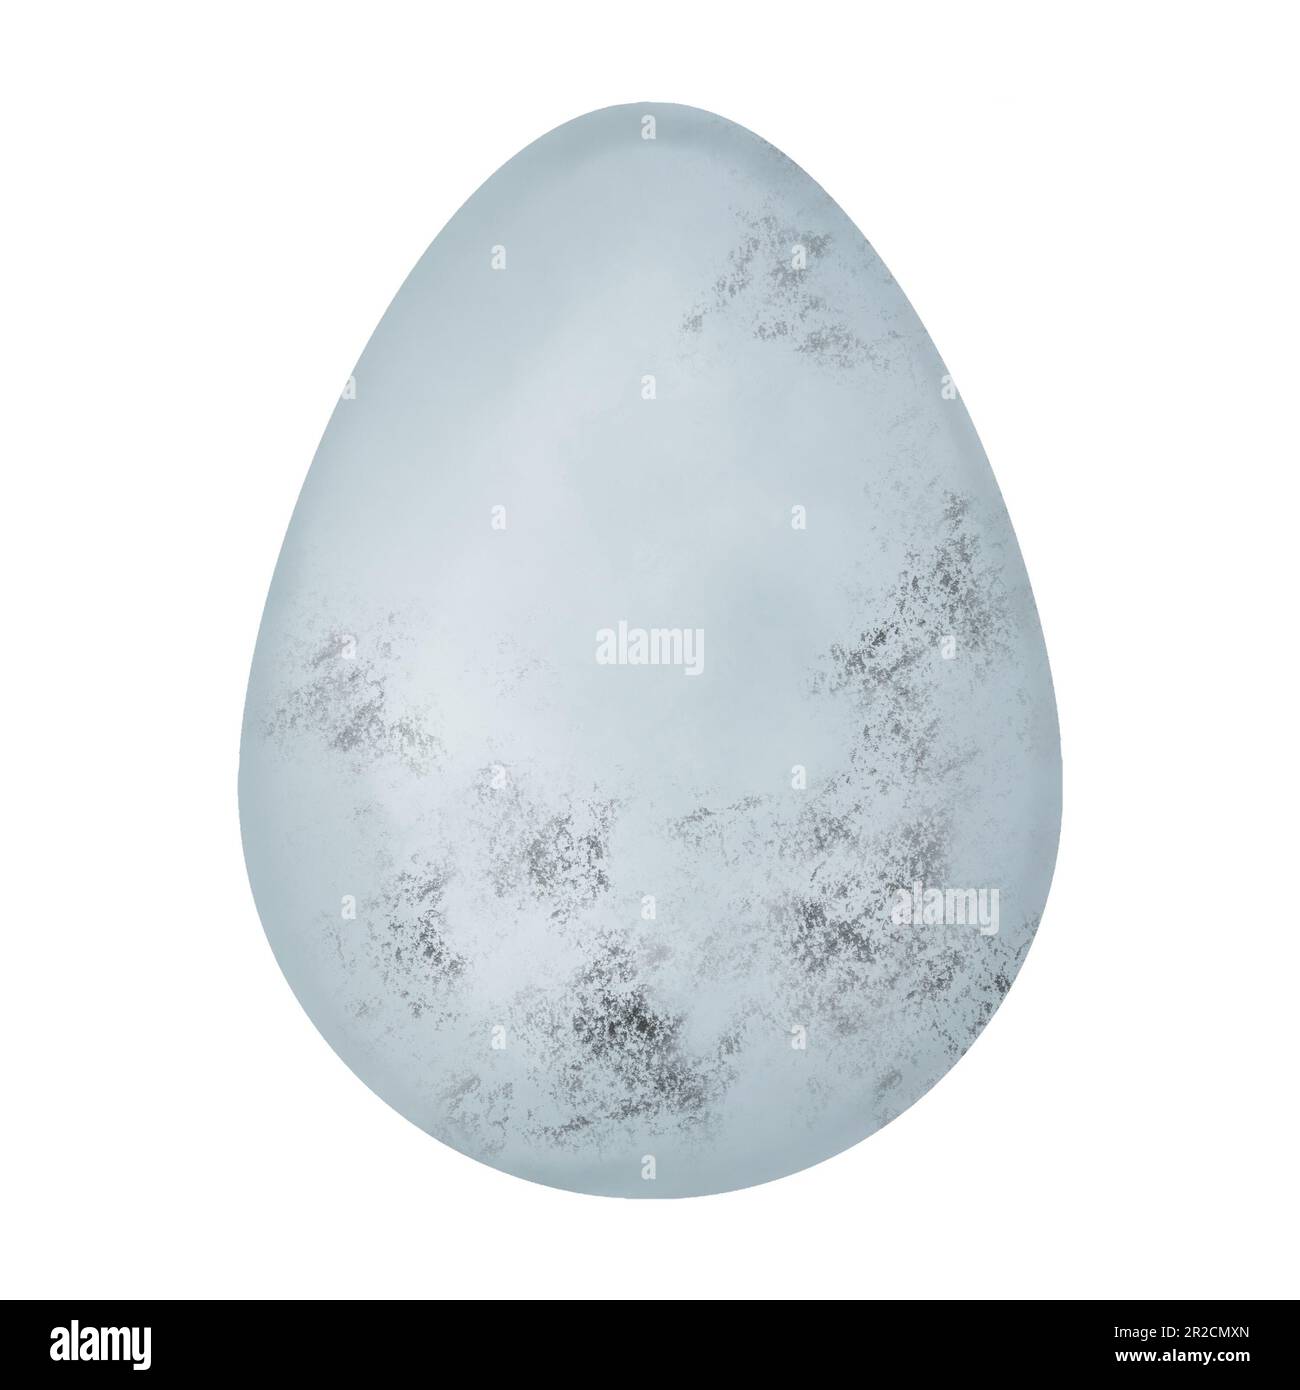 Easter egg illustration. Happy Easter blue egg isolated on white background.Greeting, birthday,Easter day decorations. Stock Photo